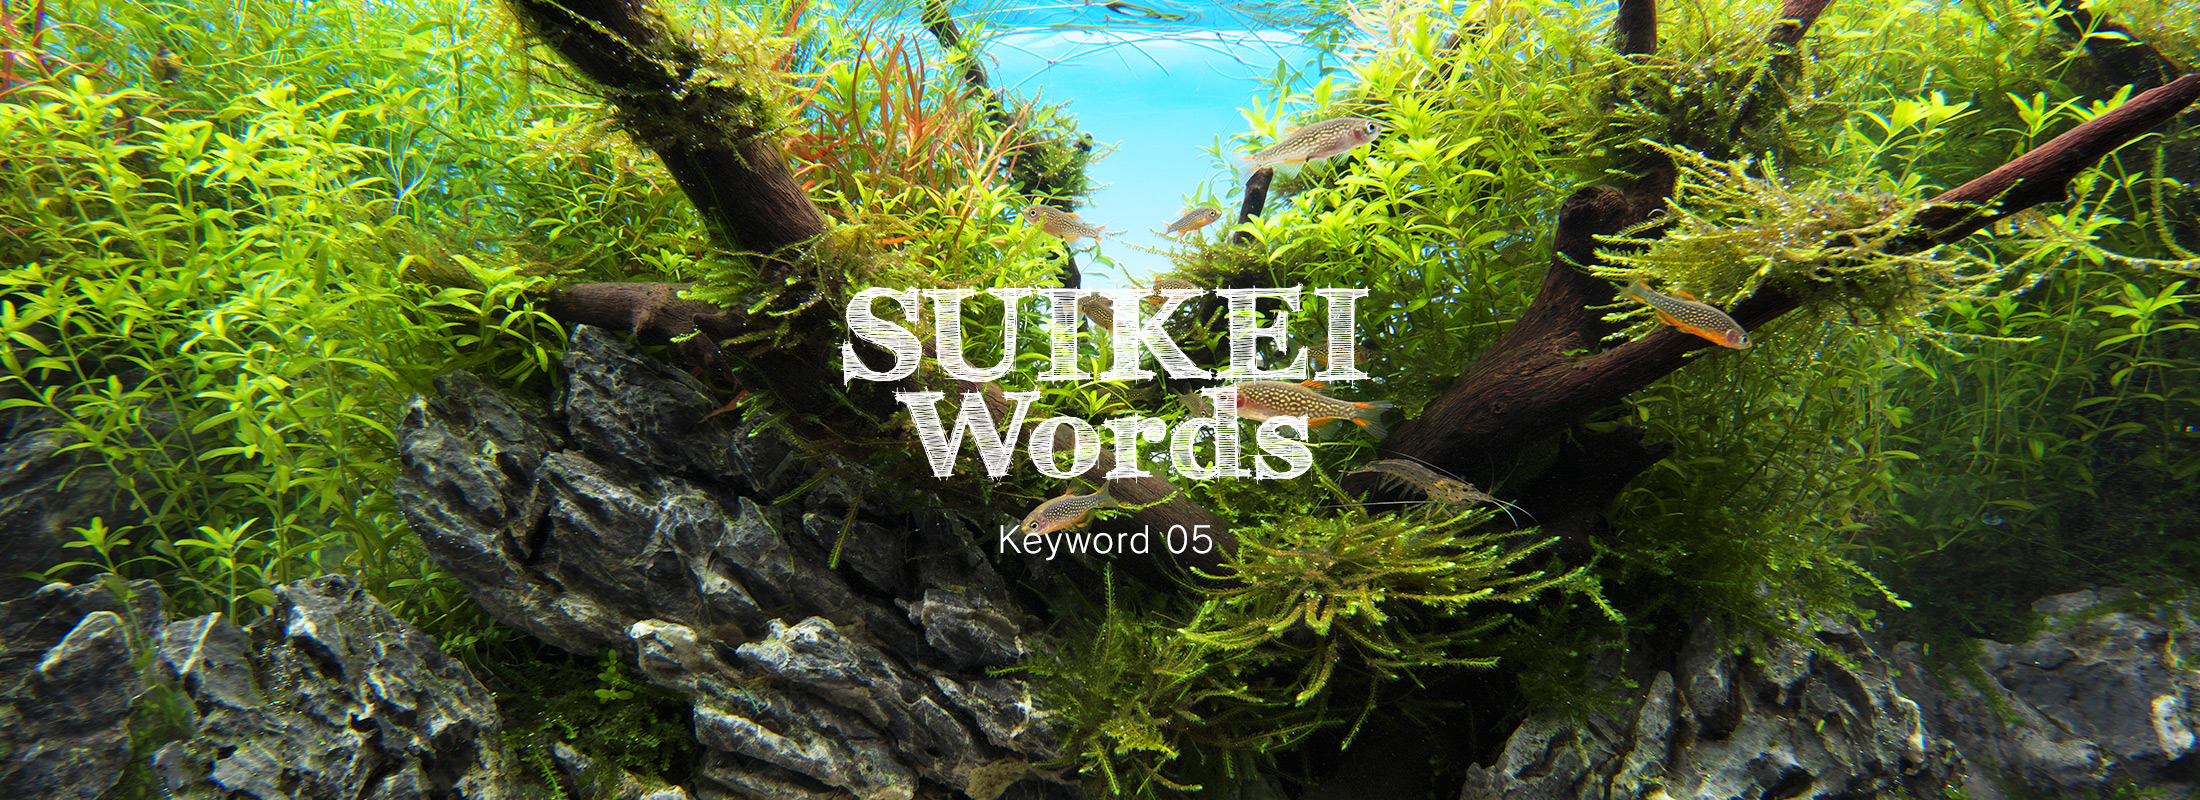 SUIKEI WORDS Keyword 05 ‘Techniques to make small layouts look bigger’